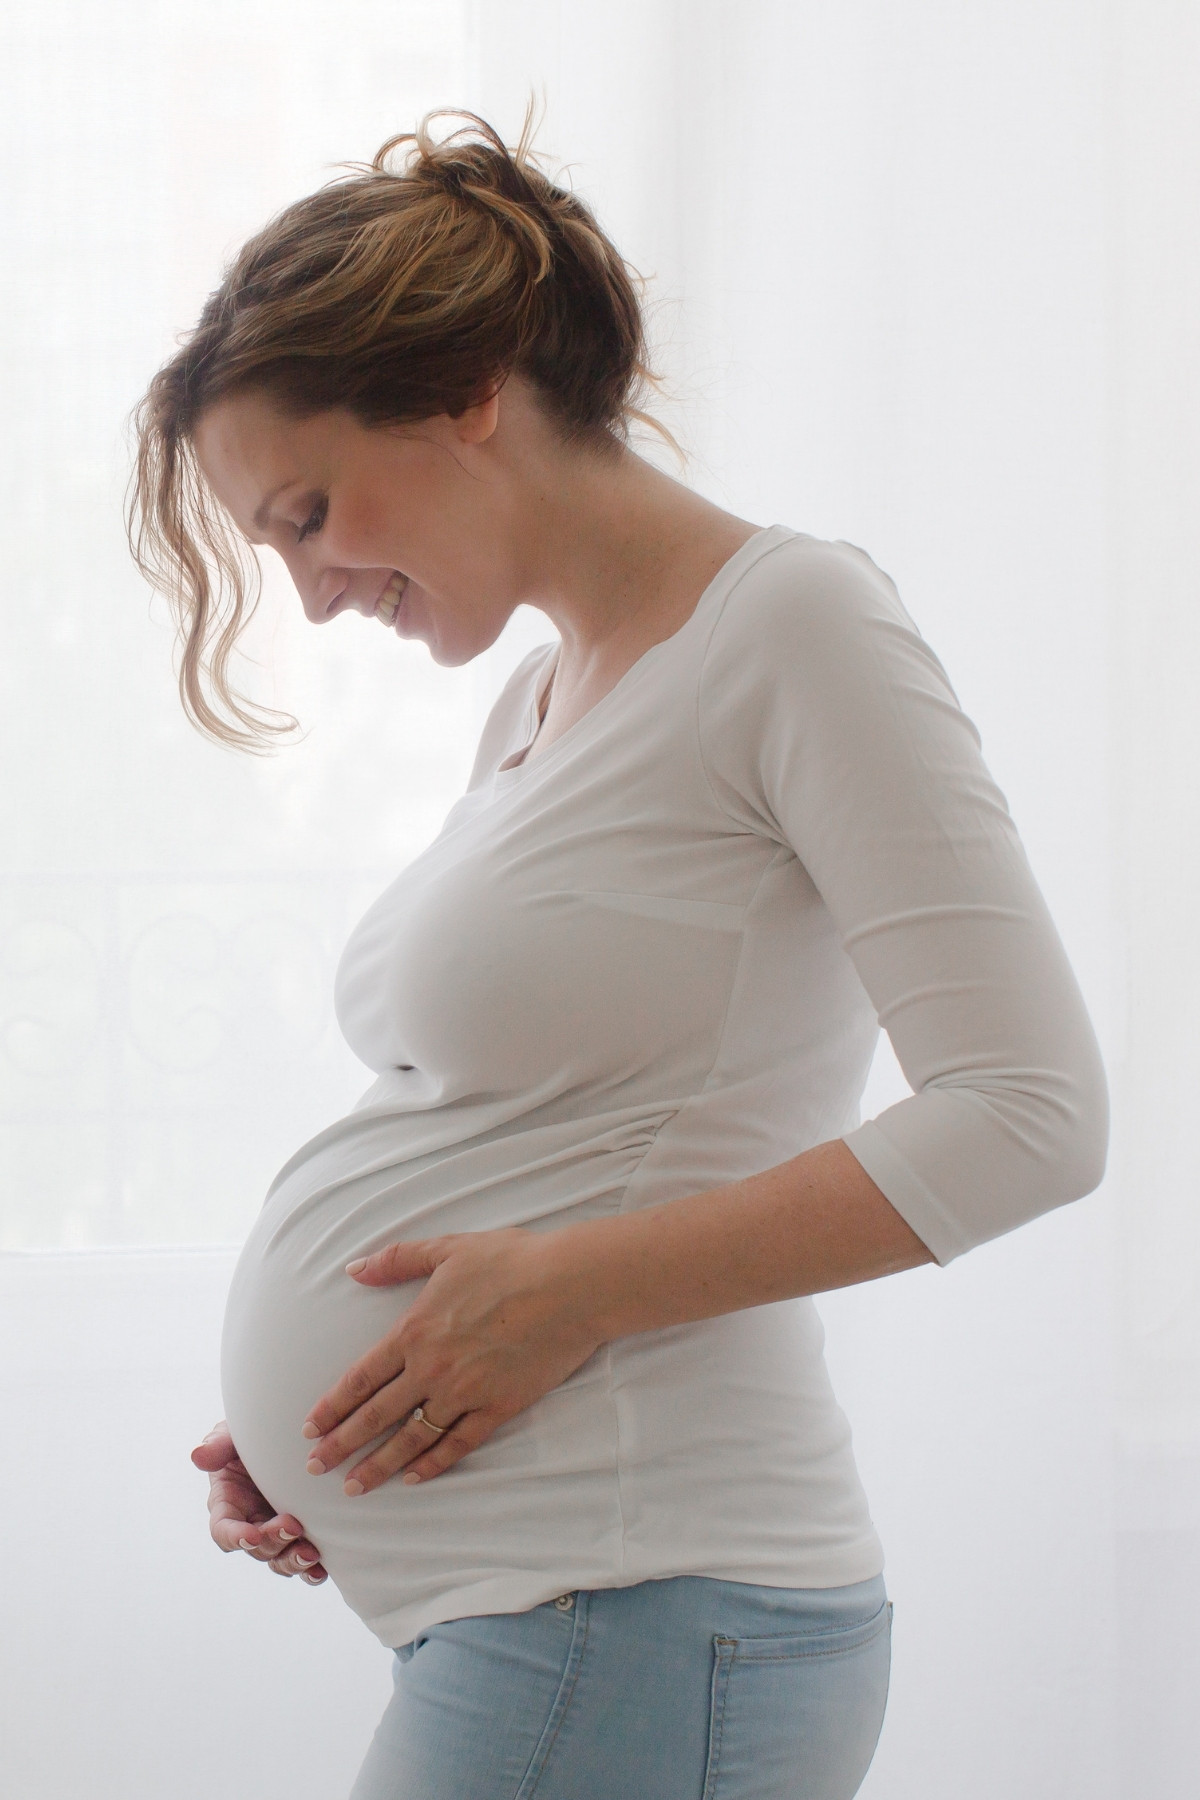 Pregnant woman cradles baby bump in front of a window shining with soft white light.